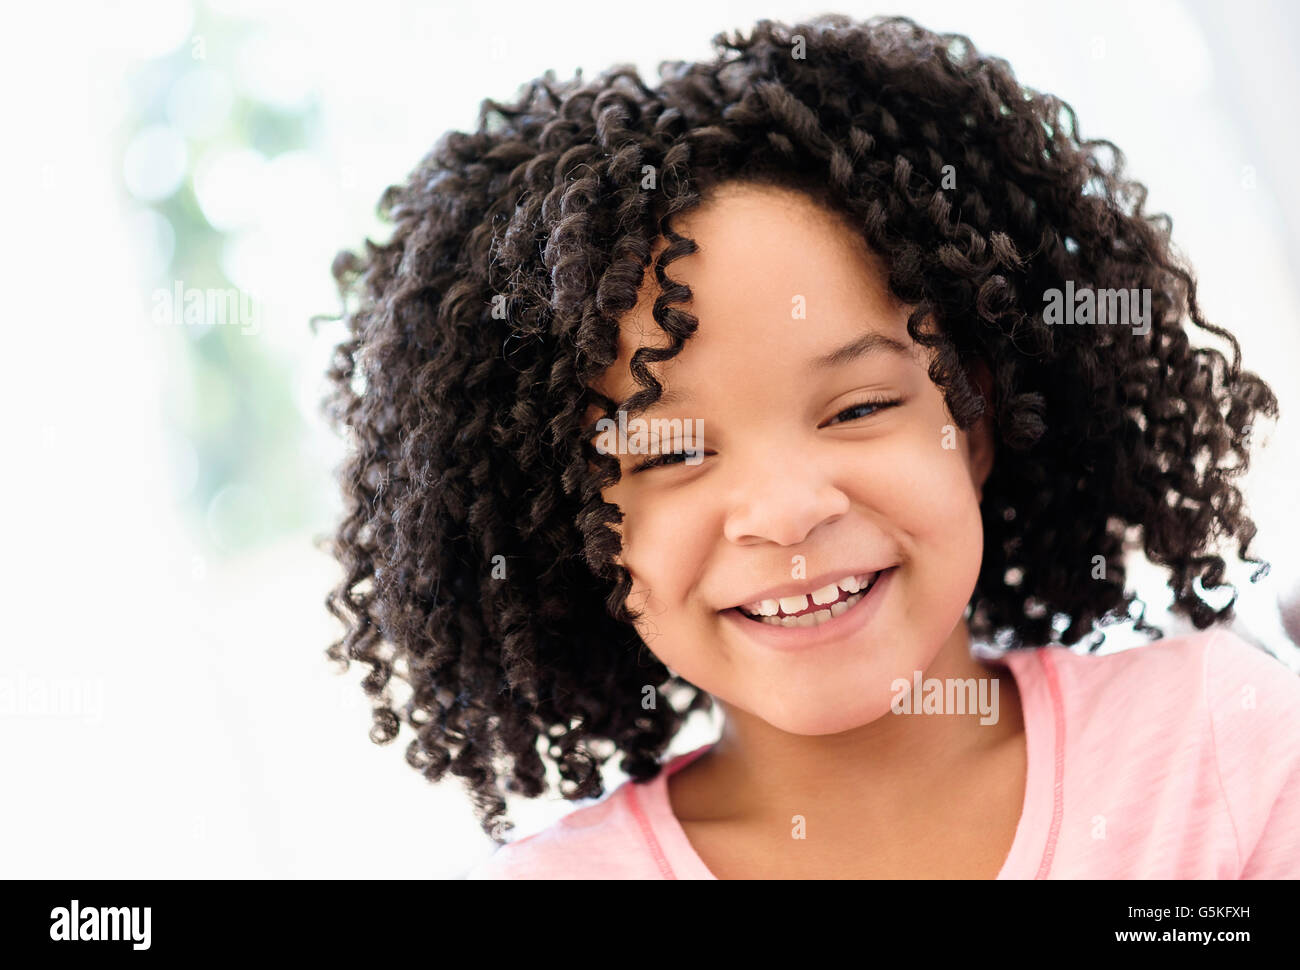 African American girl smiling Stock Photo